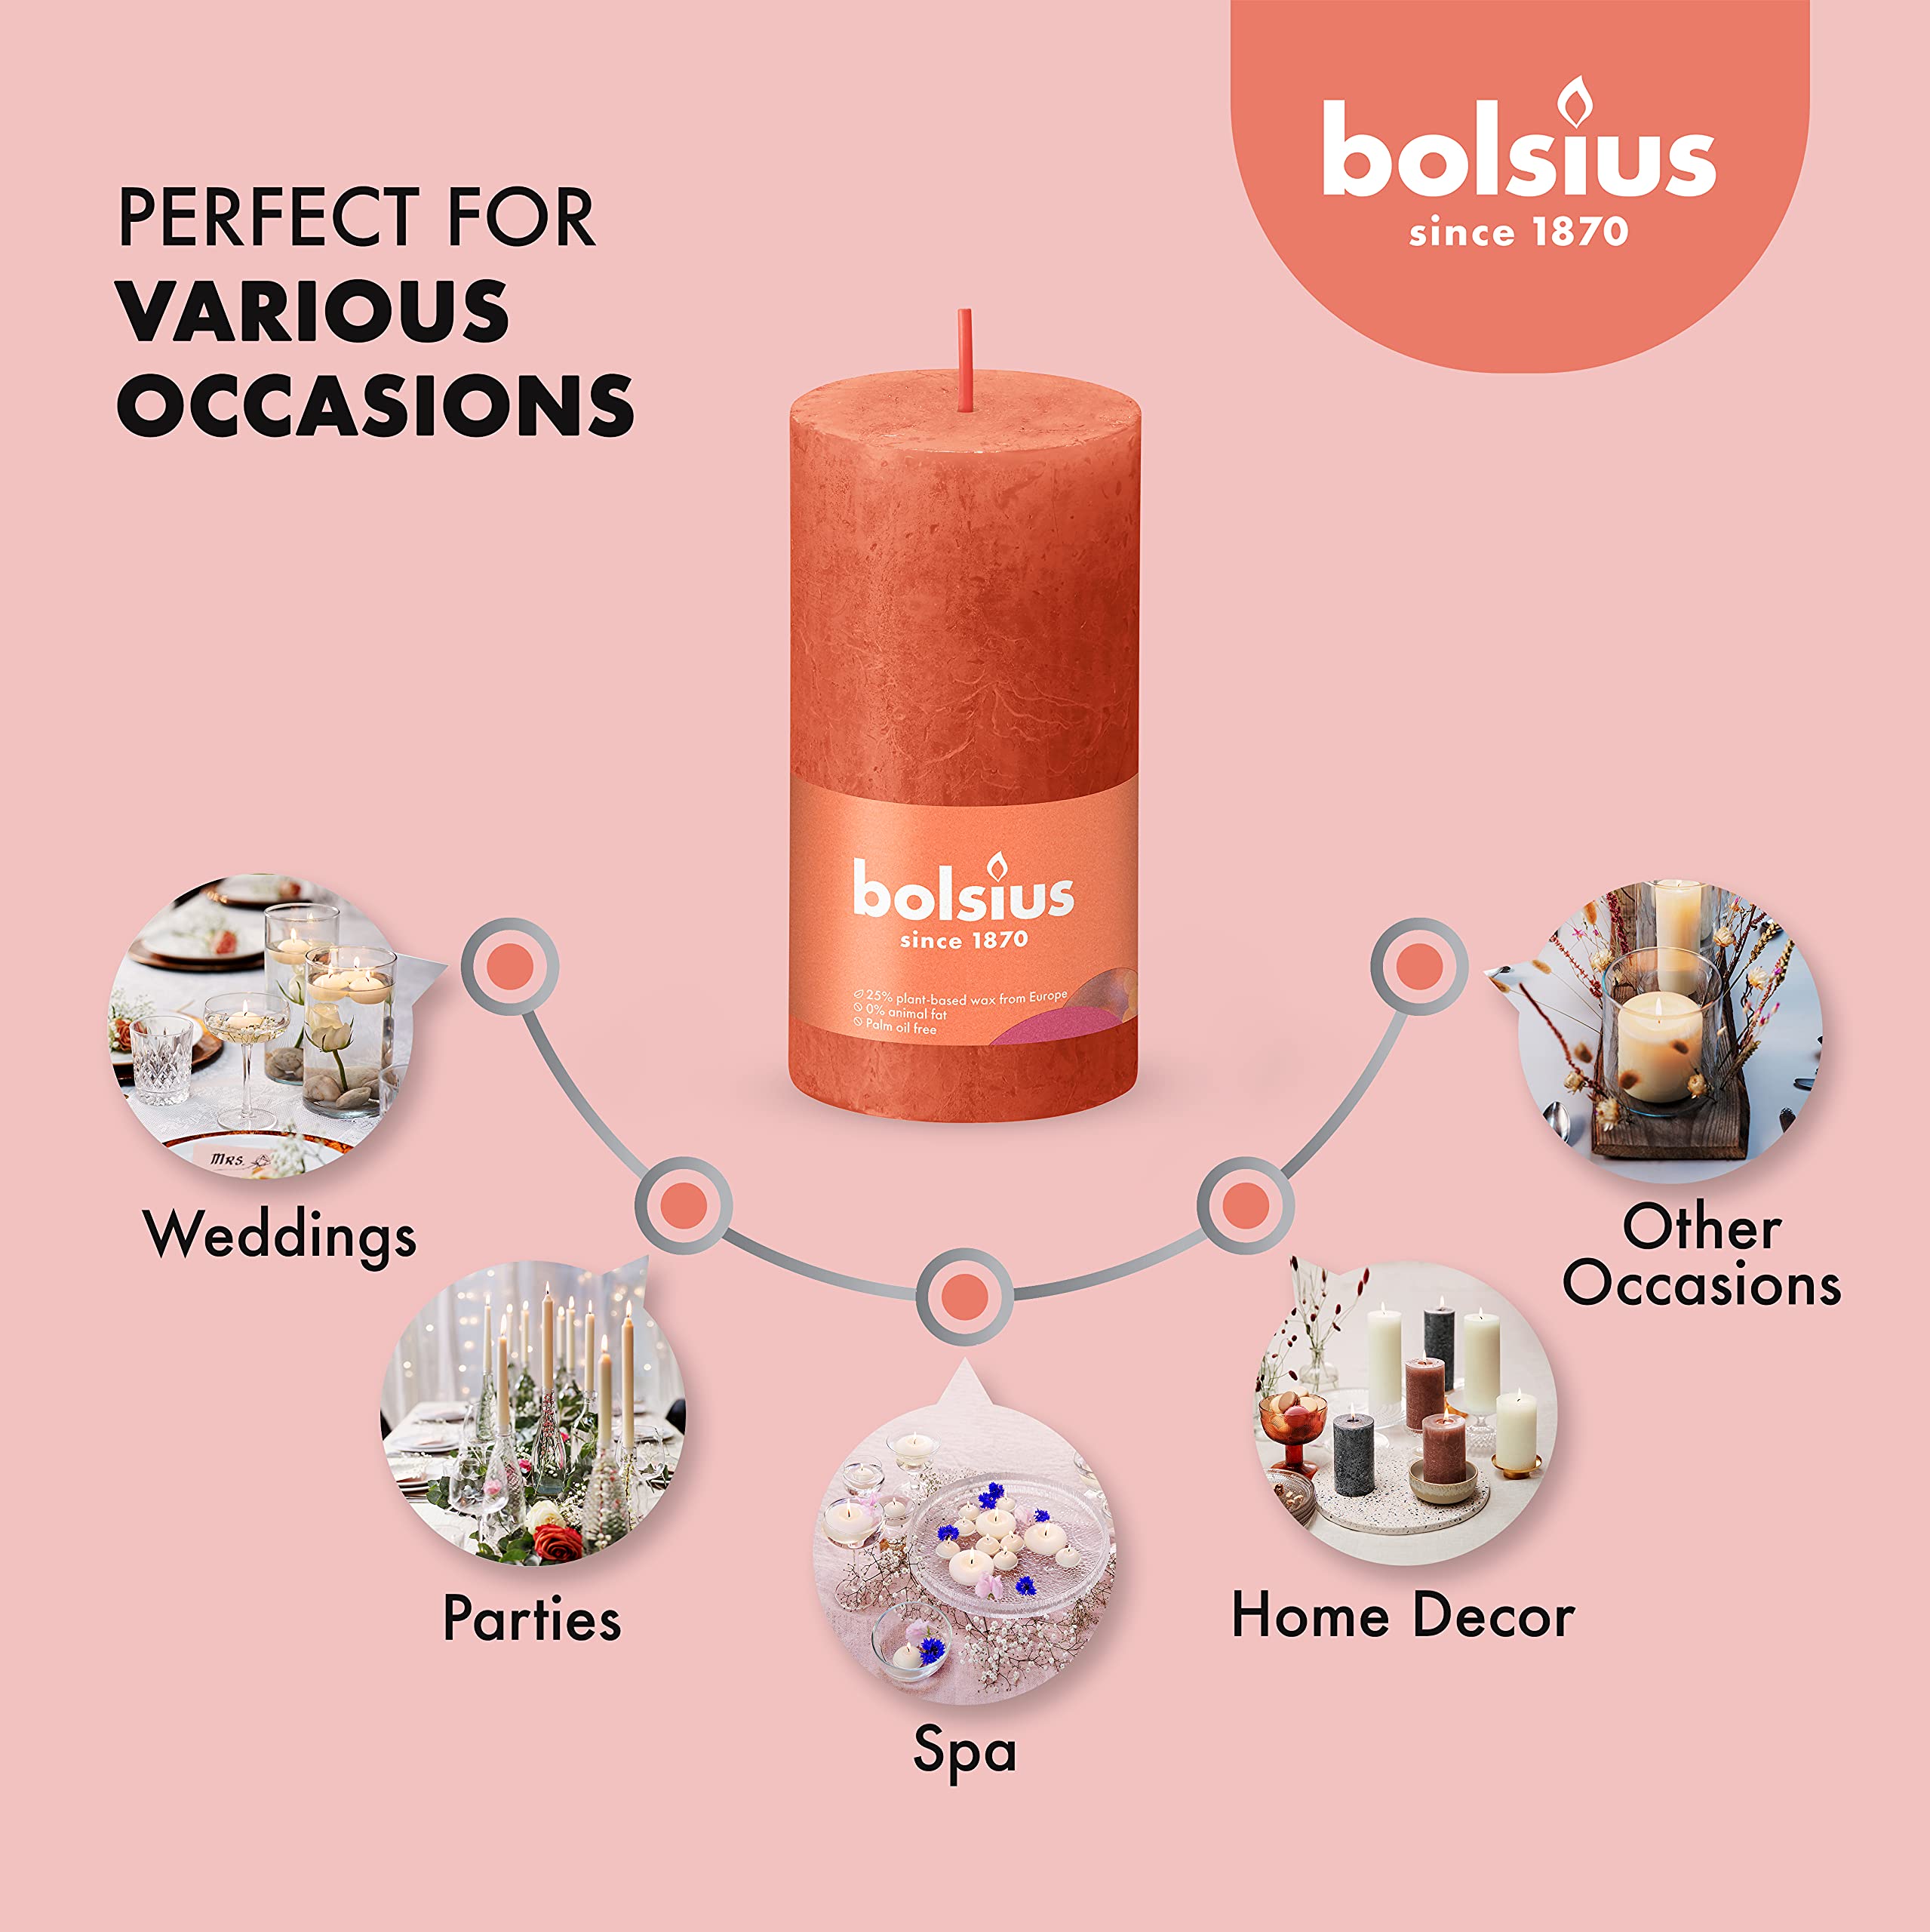 BOLSIUS 4 Pack Orange Rustic Pillar Candles - 2 X 4 Inches - Premium European Quality - Includes Natural Plant-Based Wax - Unscented Dripless Smokeless 30 Hour Party D�cor and Wedding Candles  - Good